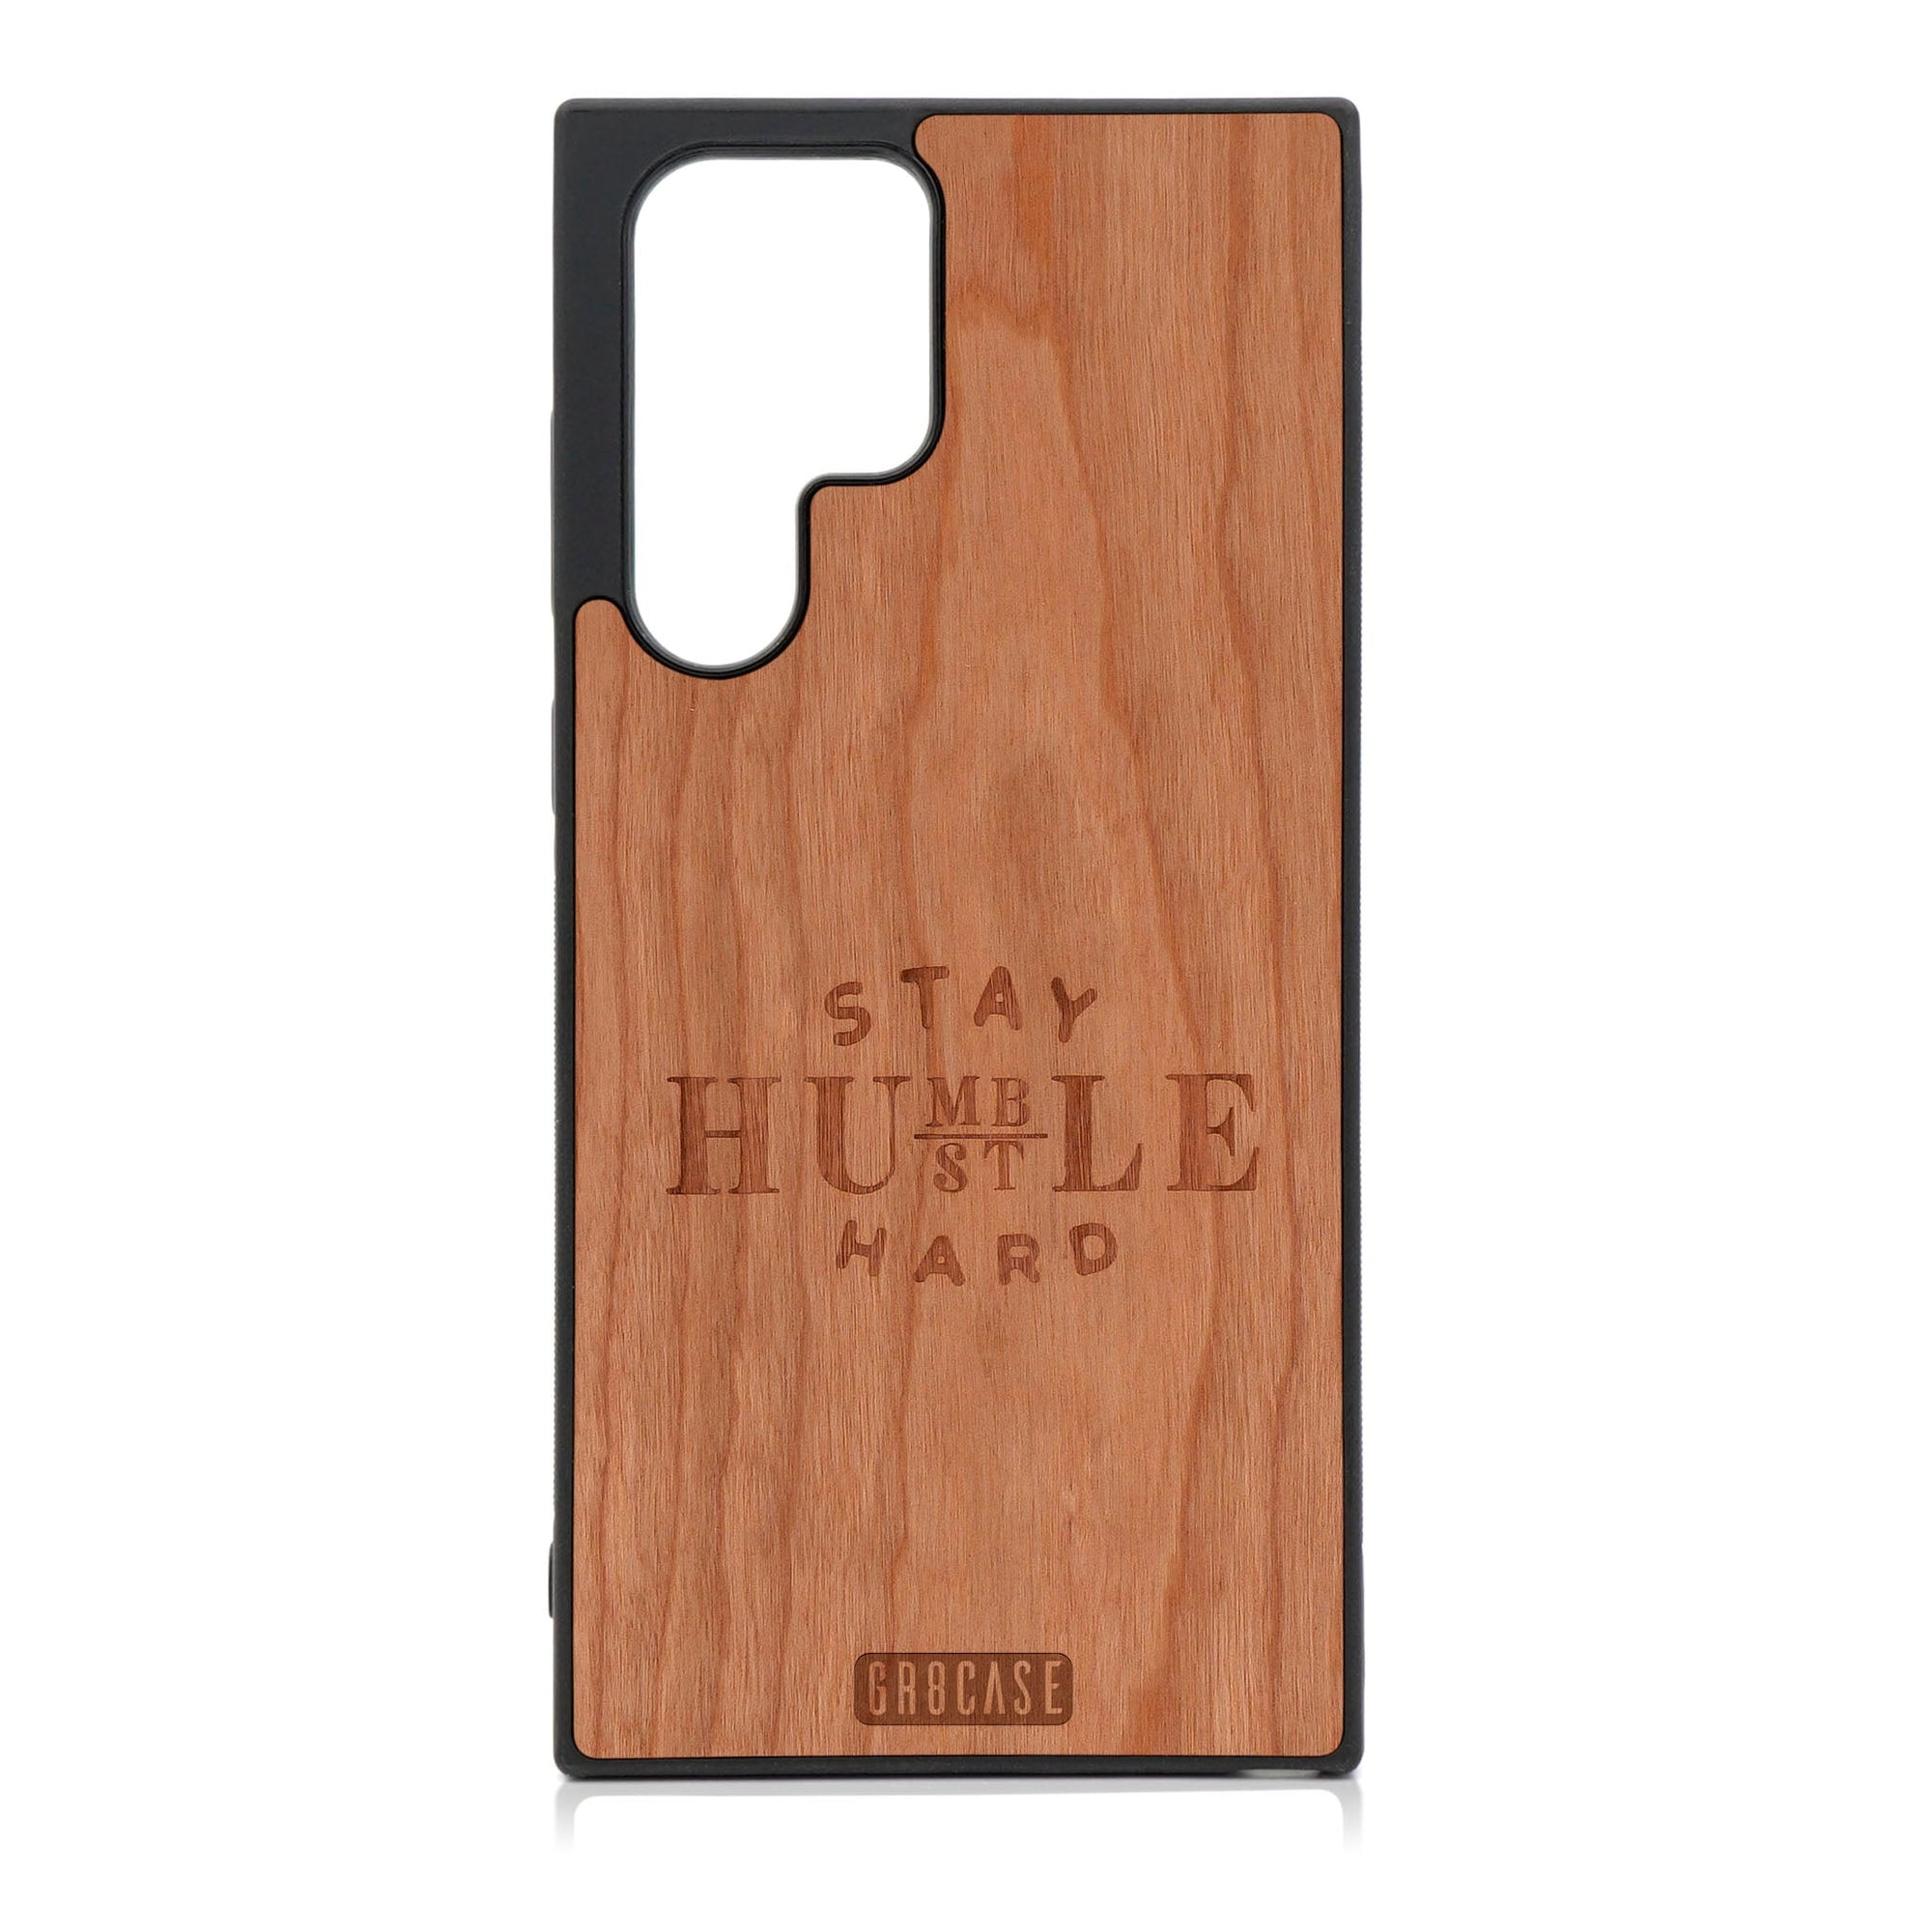 Stay Humble Hustle Hard Design Wood Case For Galaxy S23 Ultra